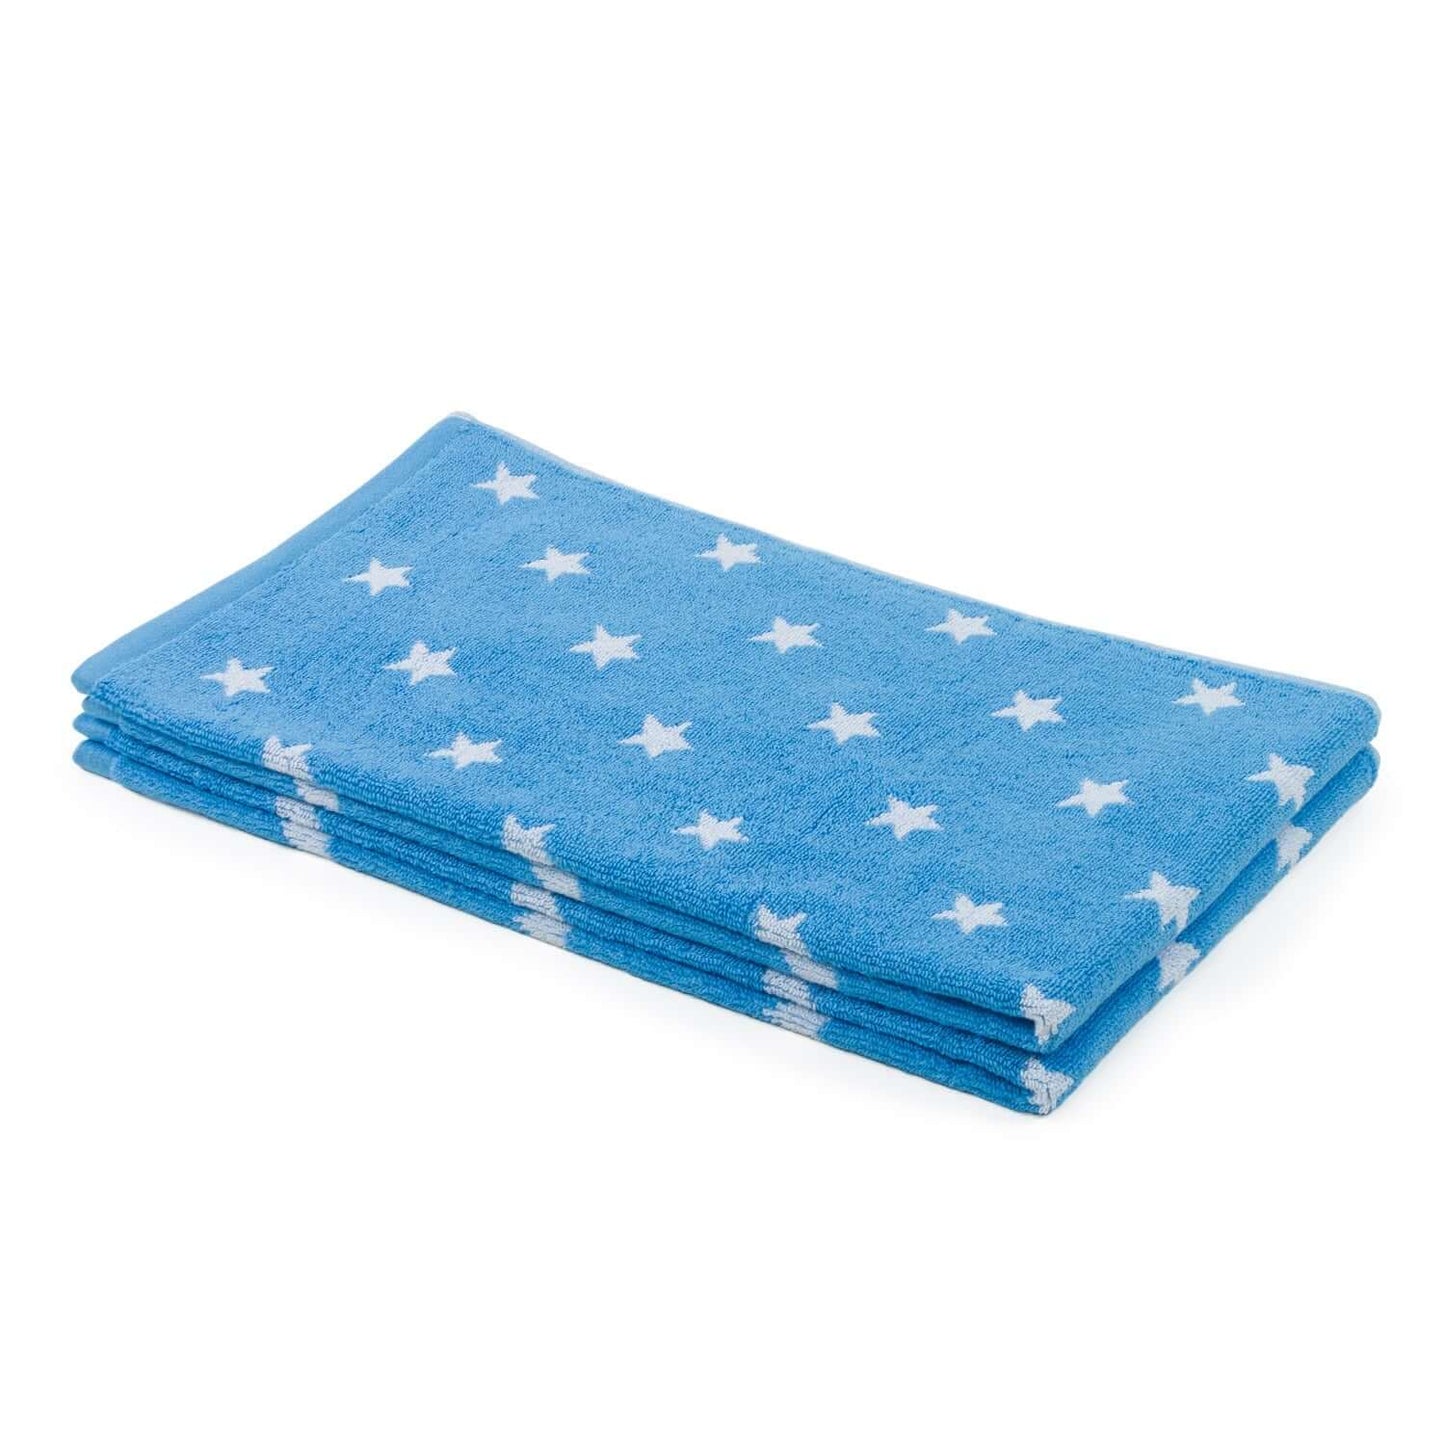 Stars Commed Cotton Towels